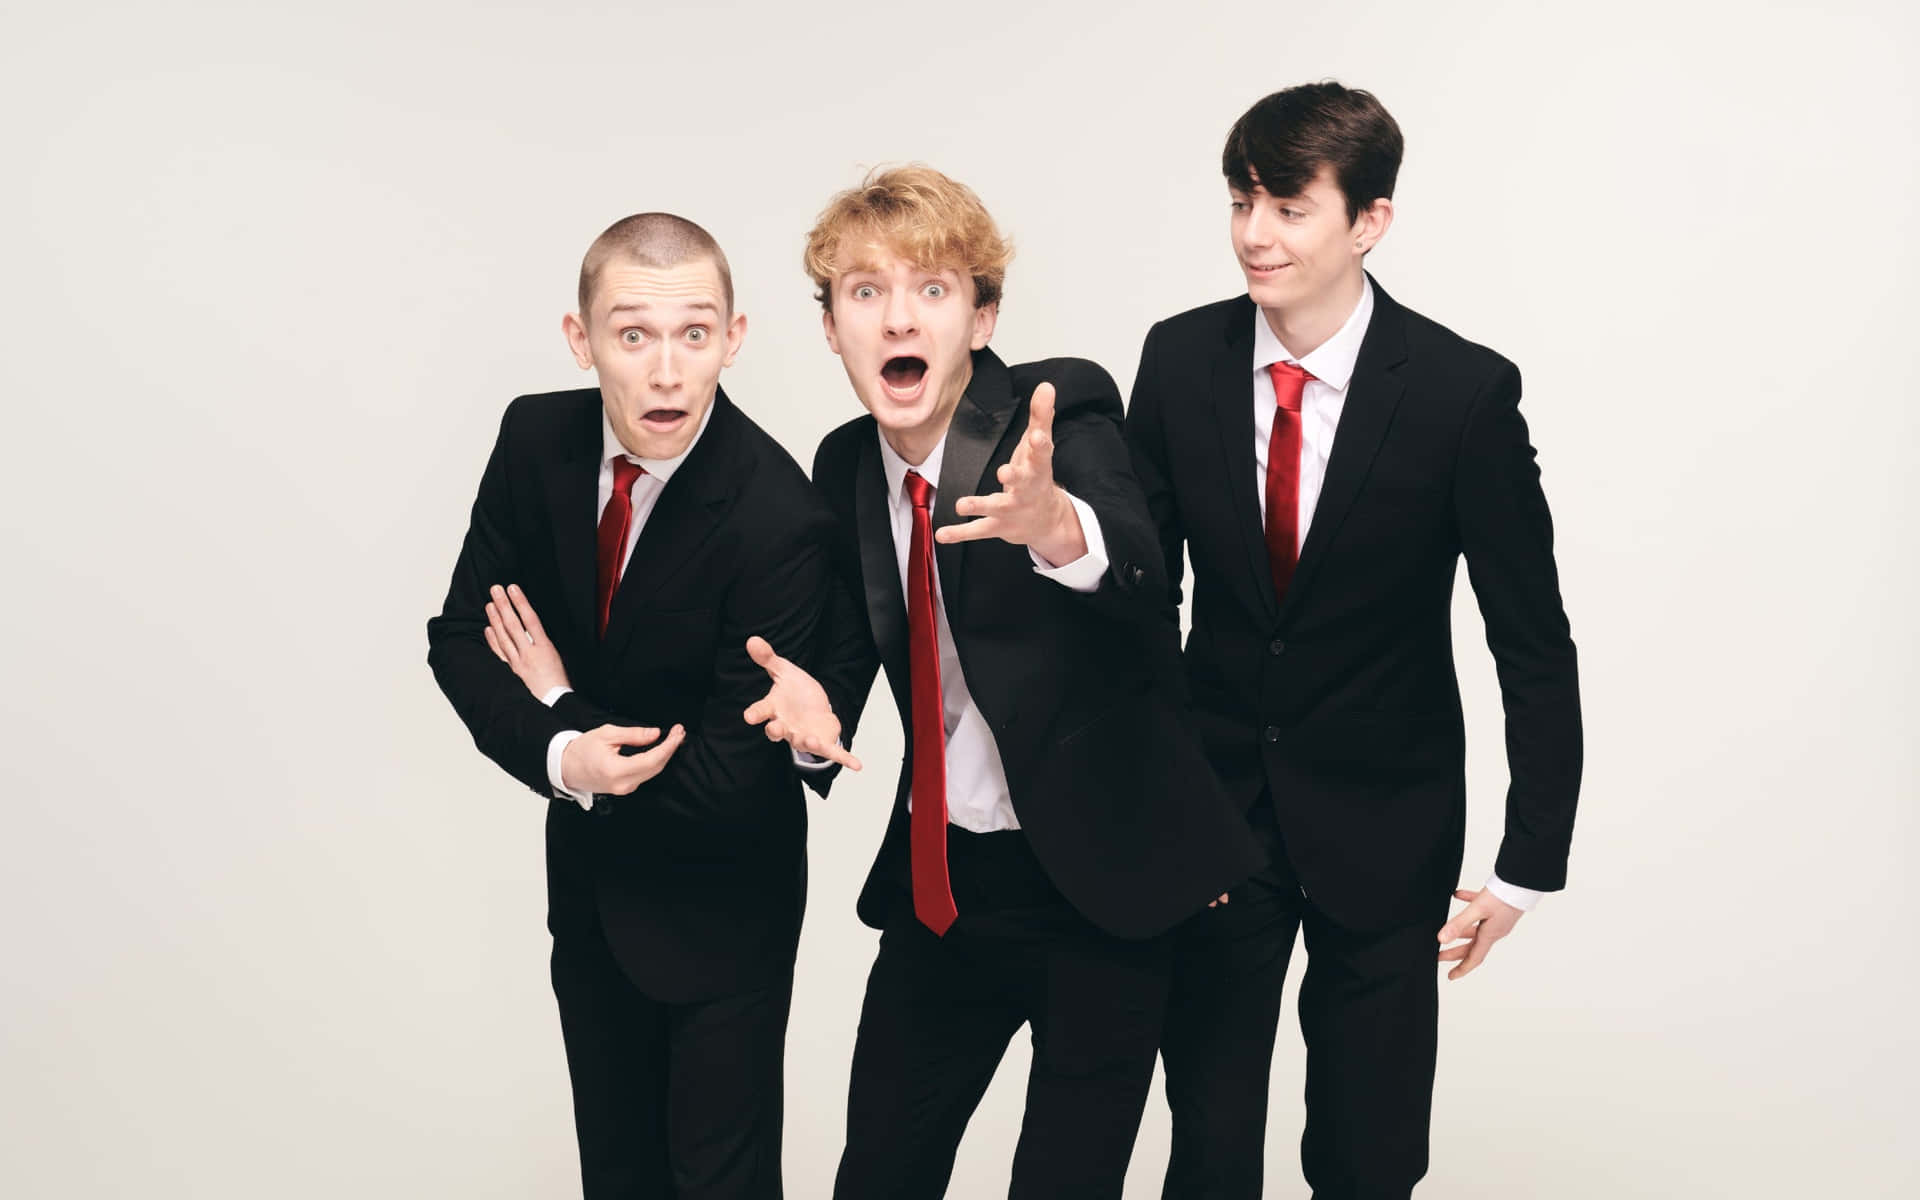 Three Young Men In Suits And Ties Posing